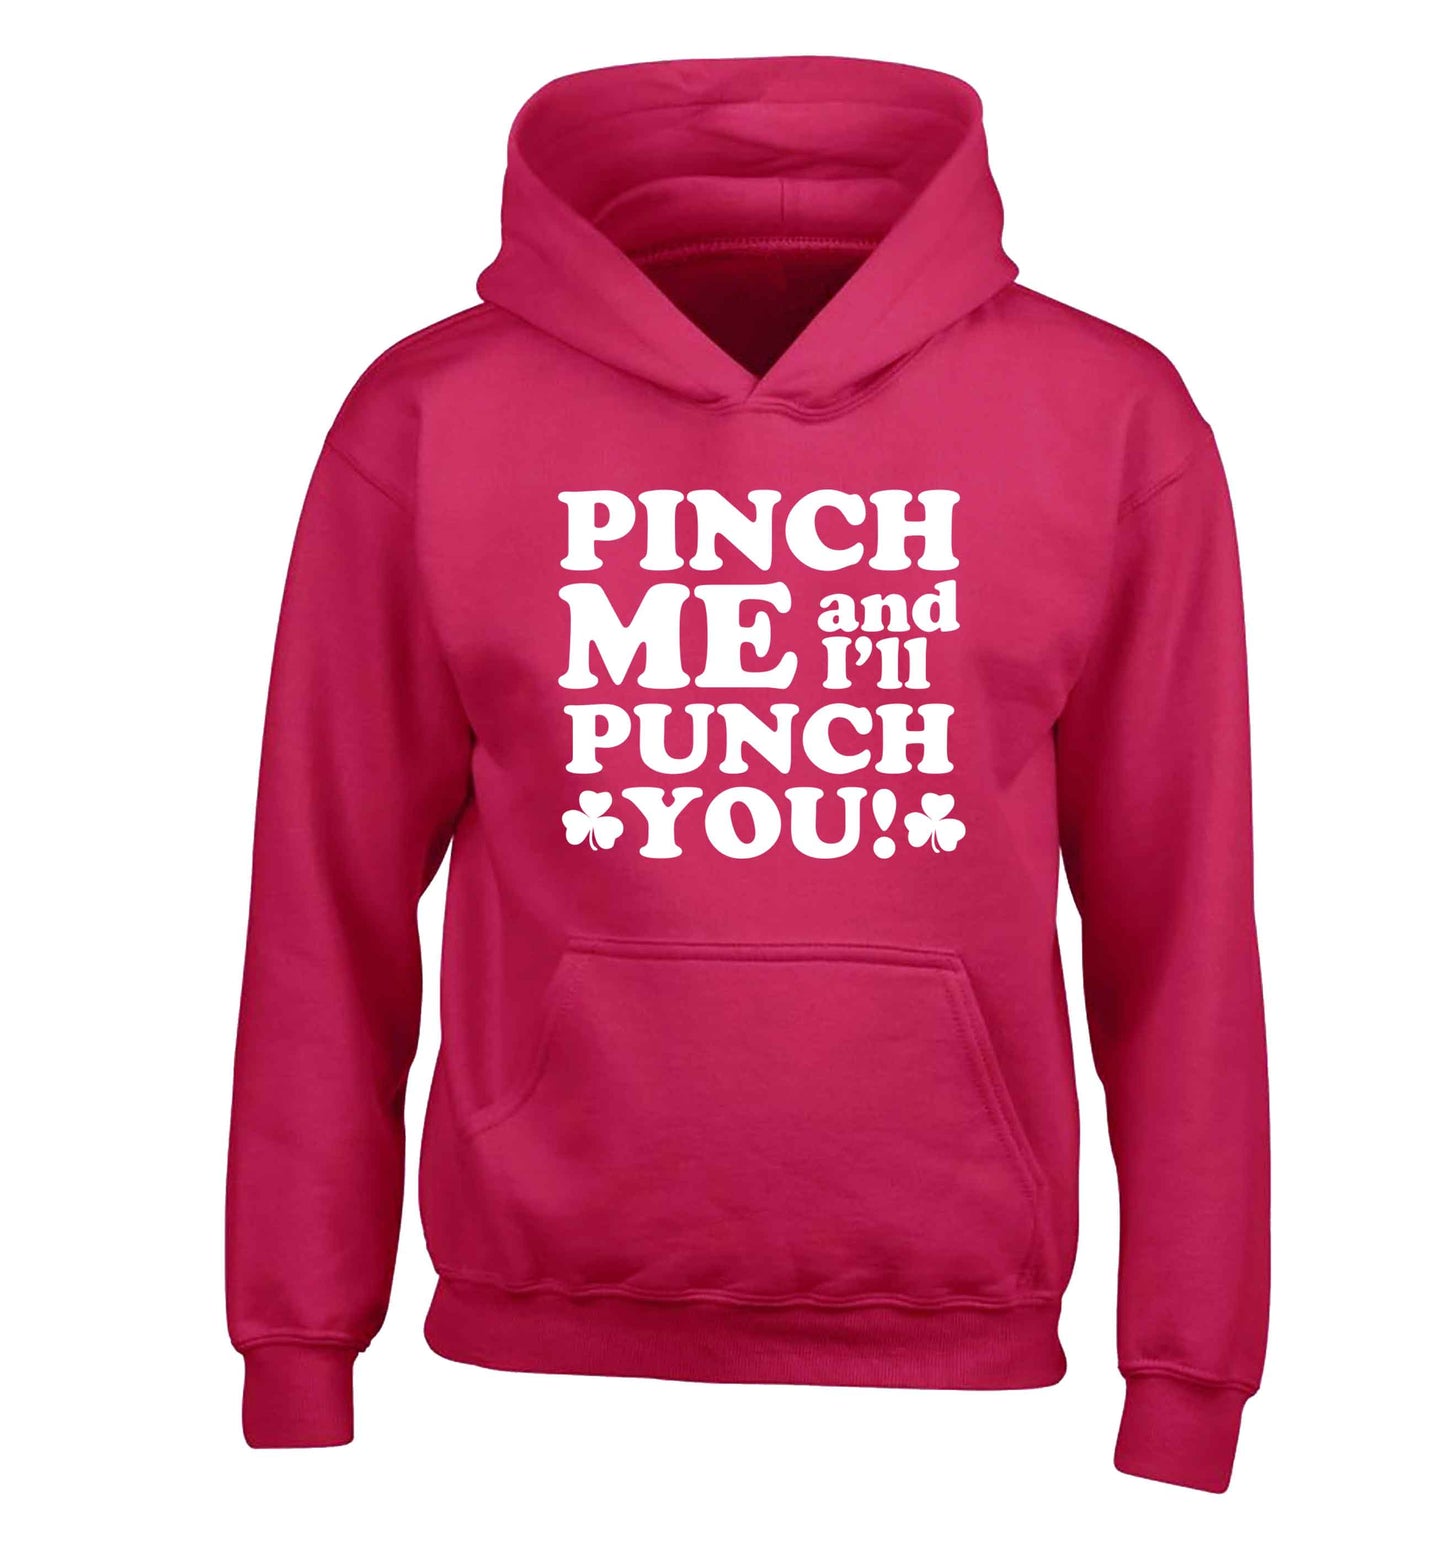 Pinch me and I'll punch you children's pink hoodie 12-13 Years